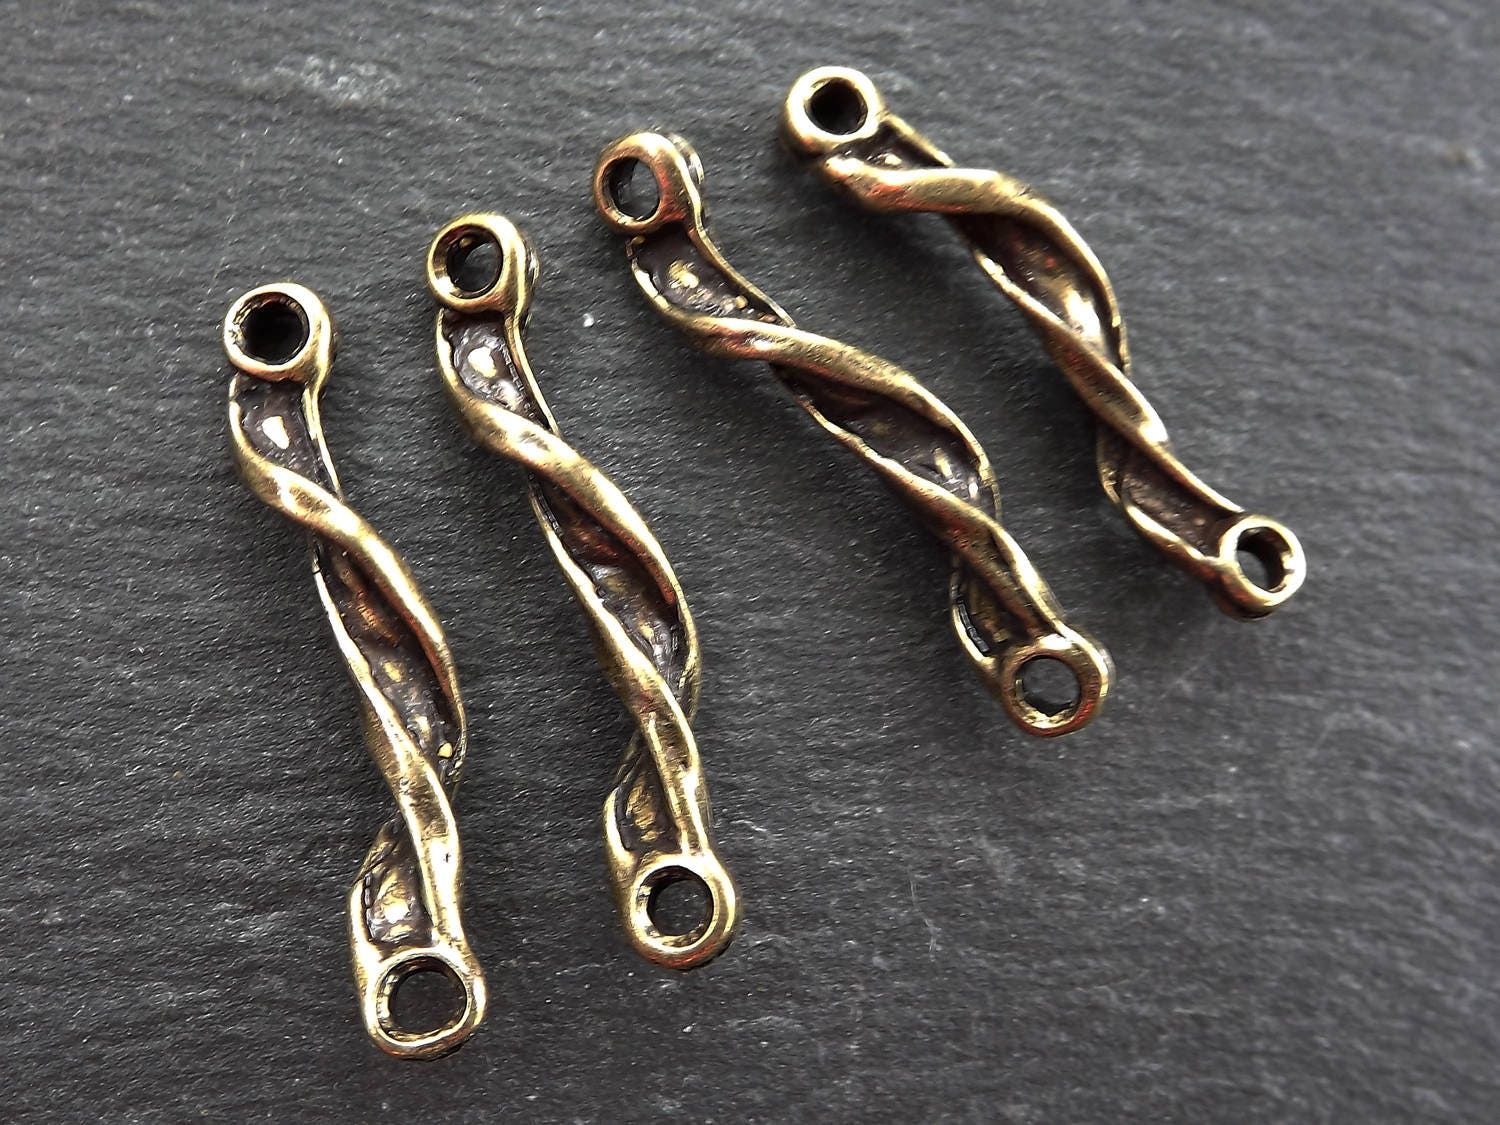 Rustic Twisted Twin 2 Hole Bar Connector -  Antique Bronze Plated - 4pcs